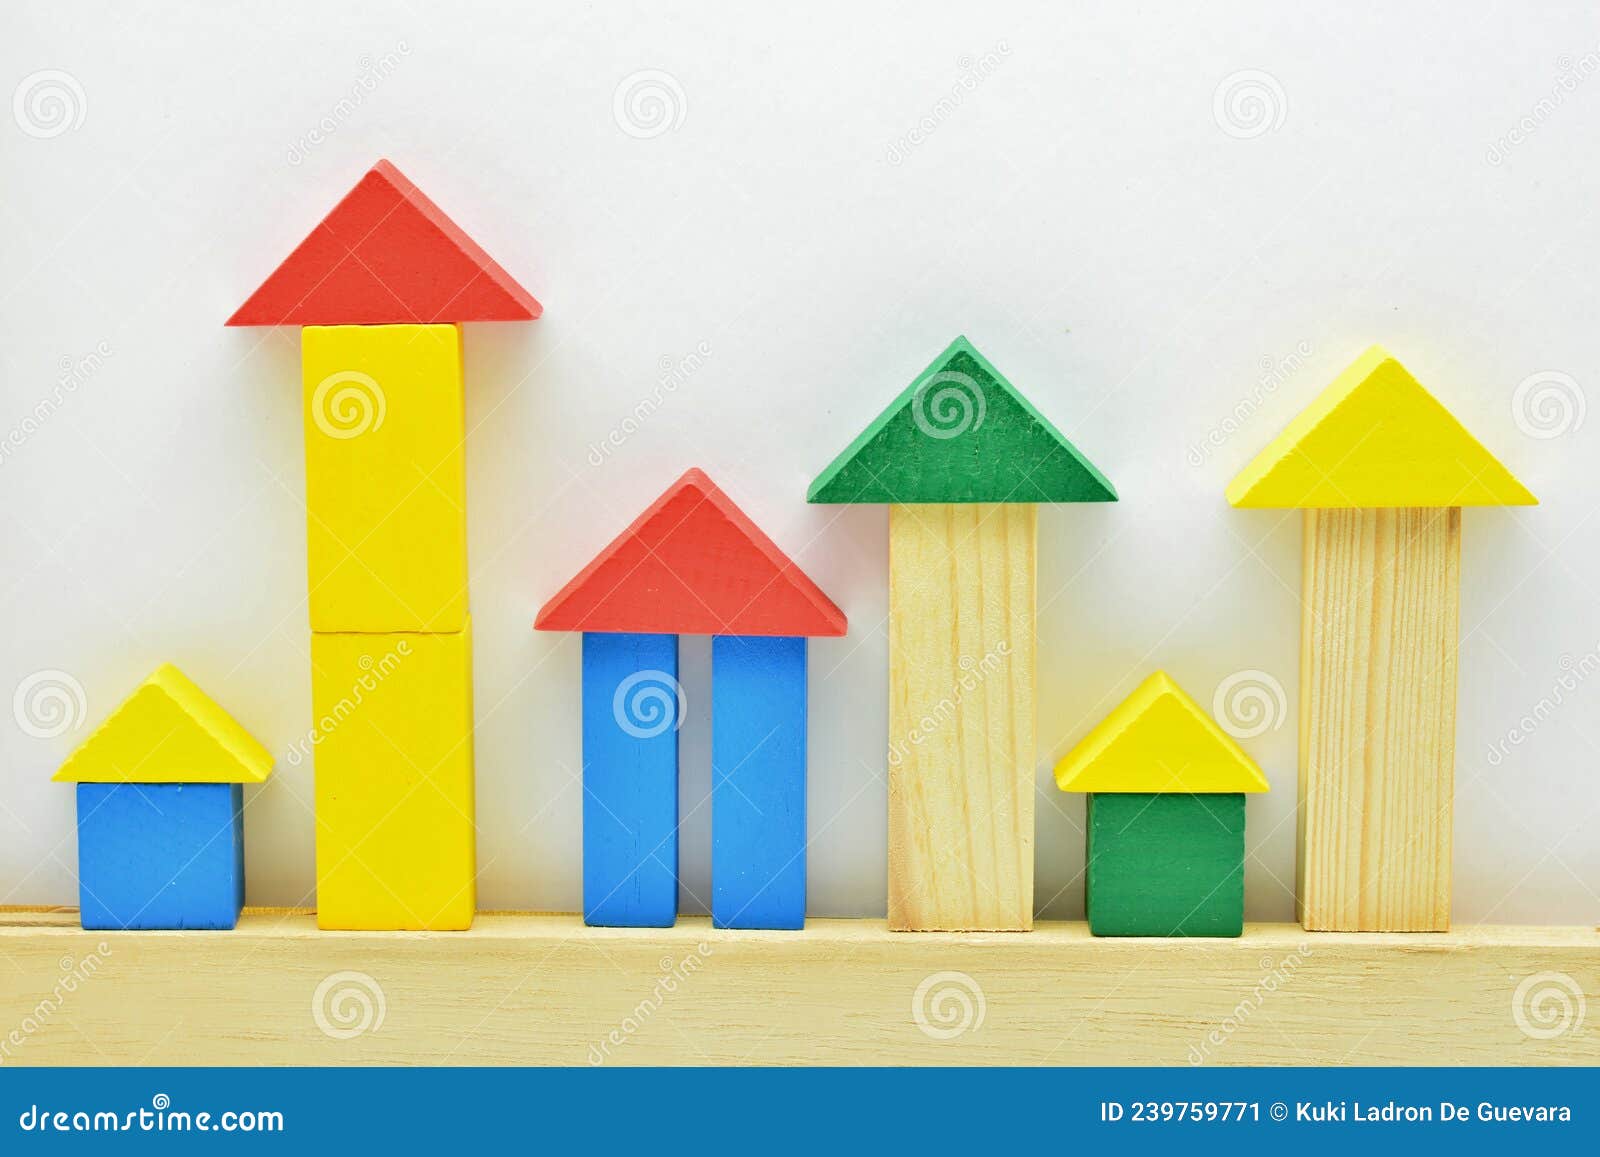 construction with colored wooden blocks, with white background